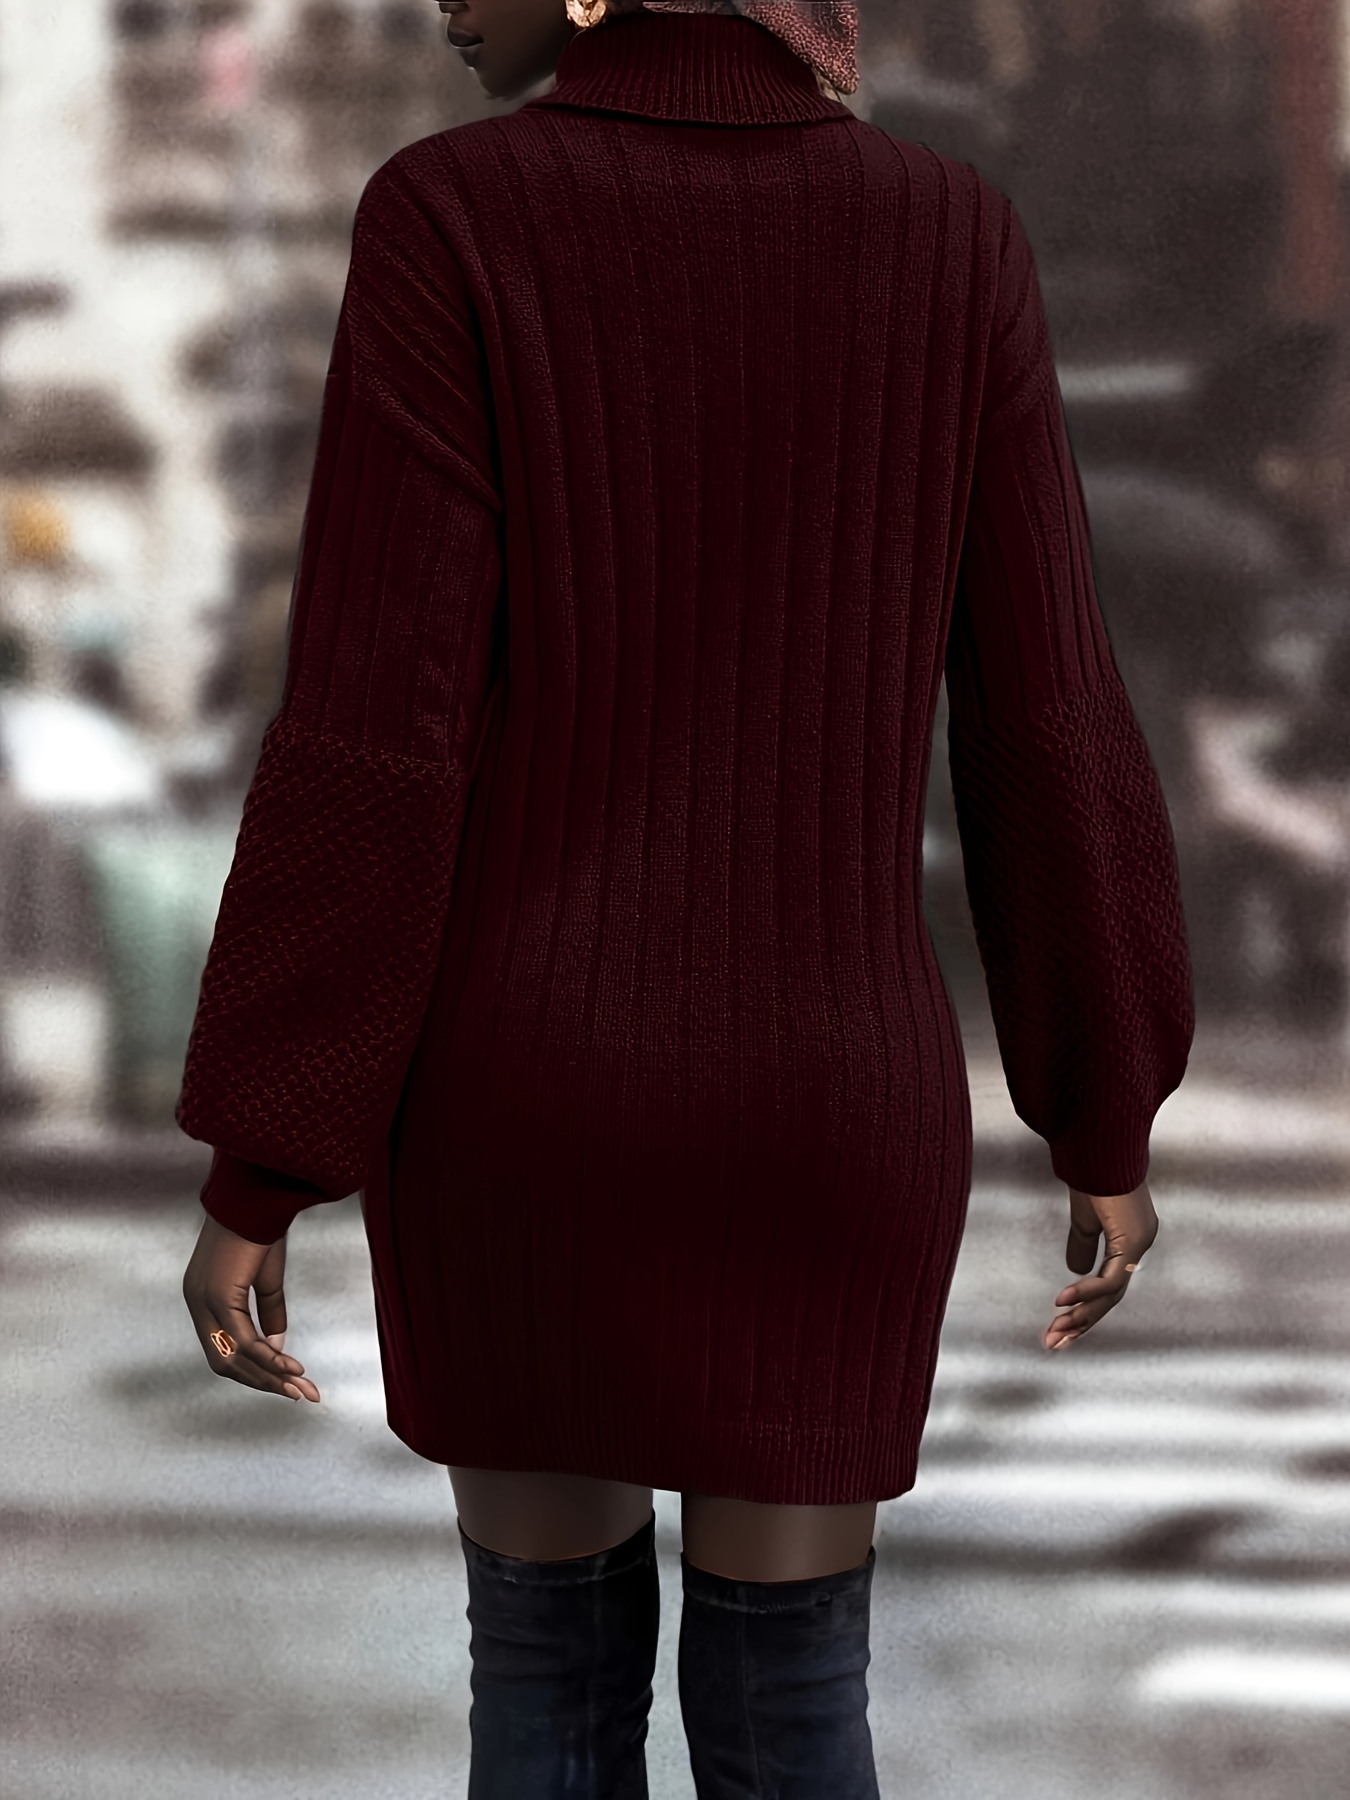  PRDECE Sweater Dress for Women High Neck Ribbed Knit